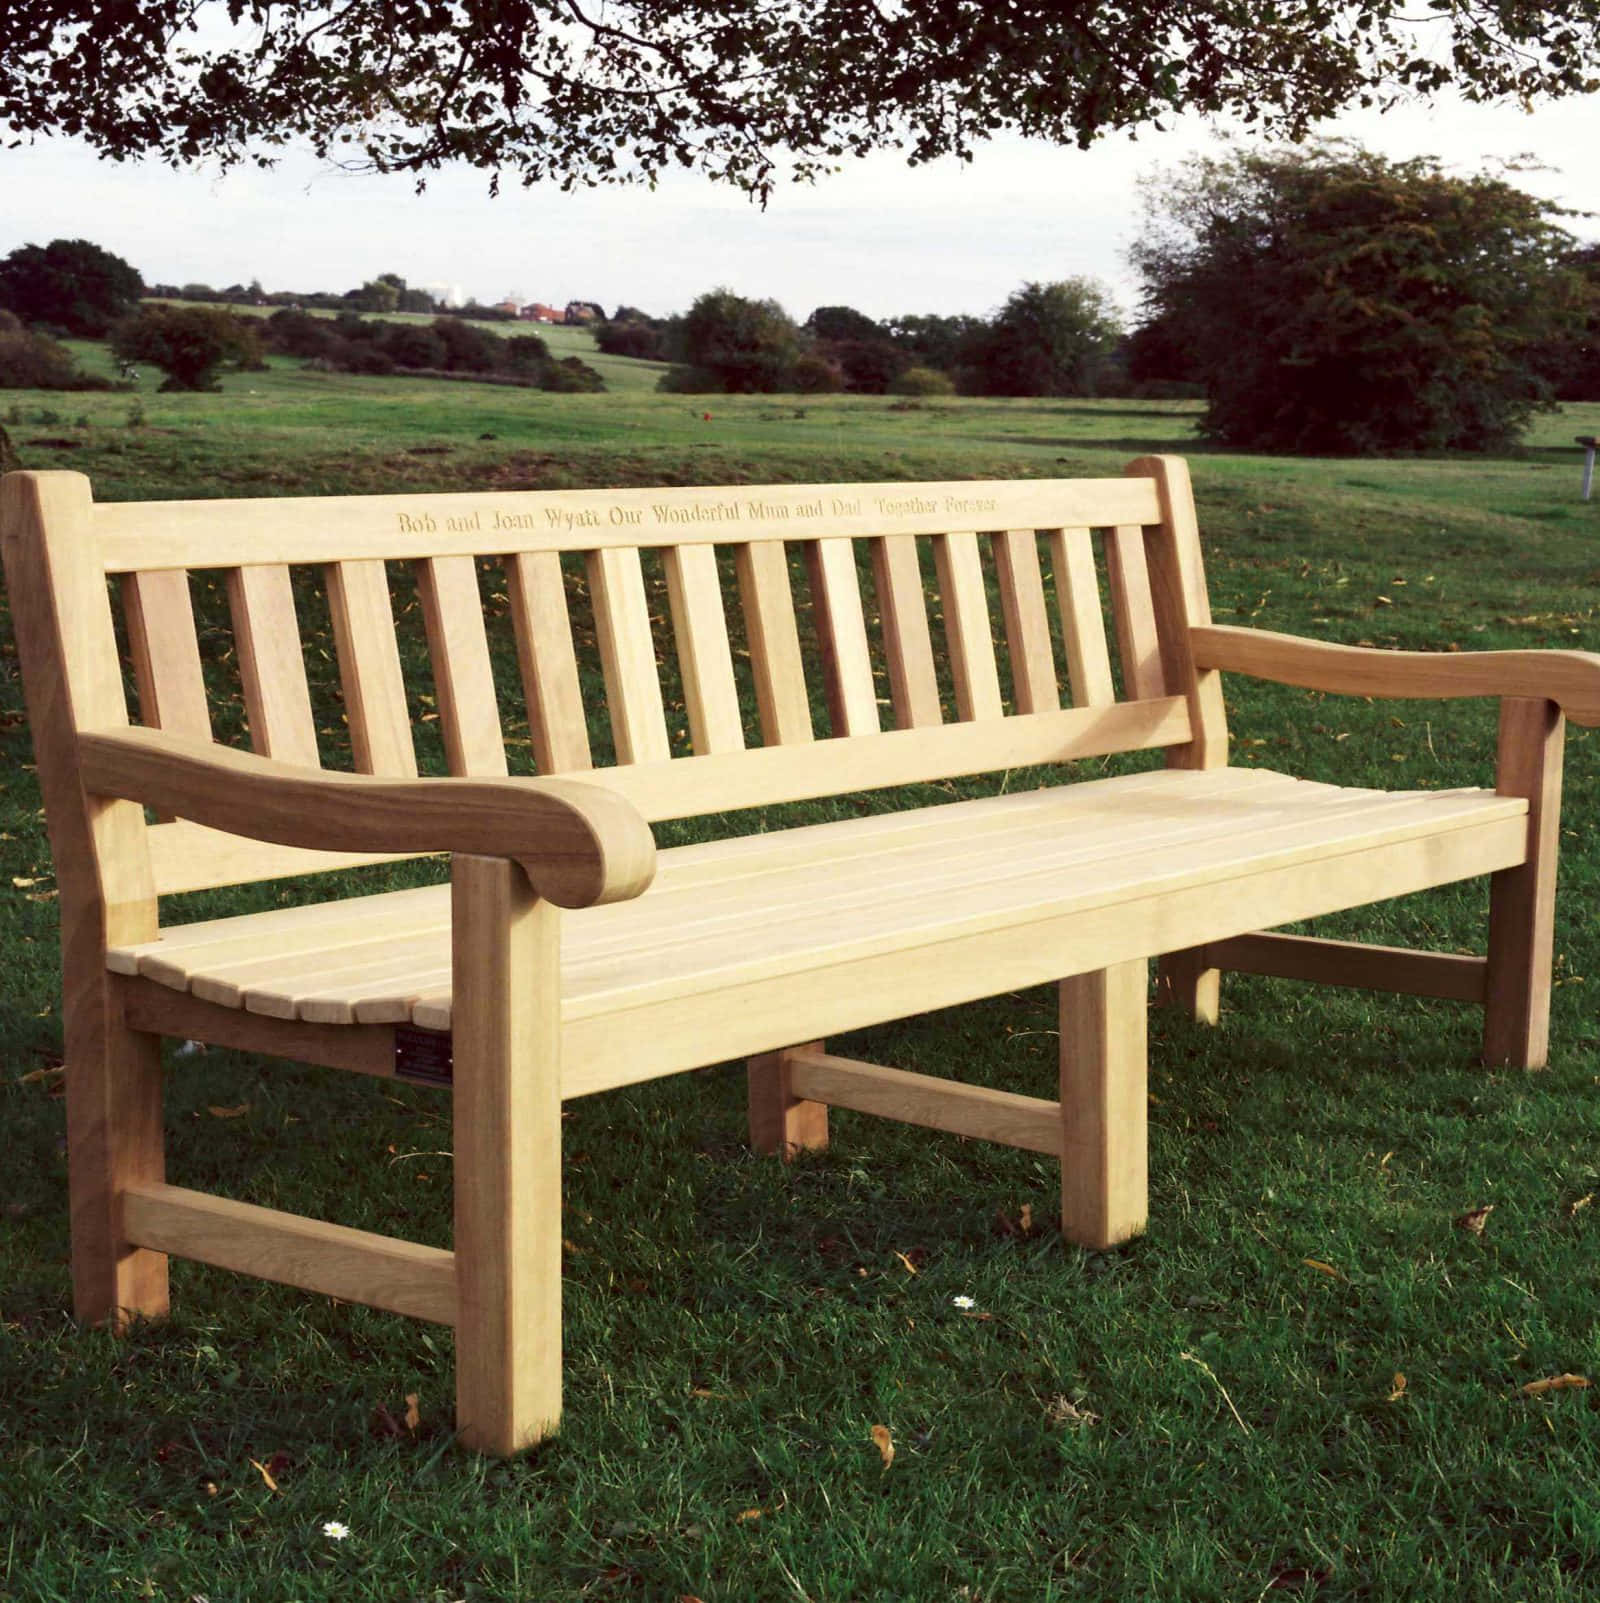 Enjoy the great outdoors with a Bench